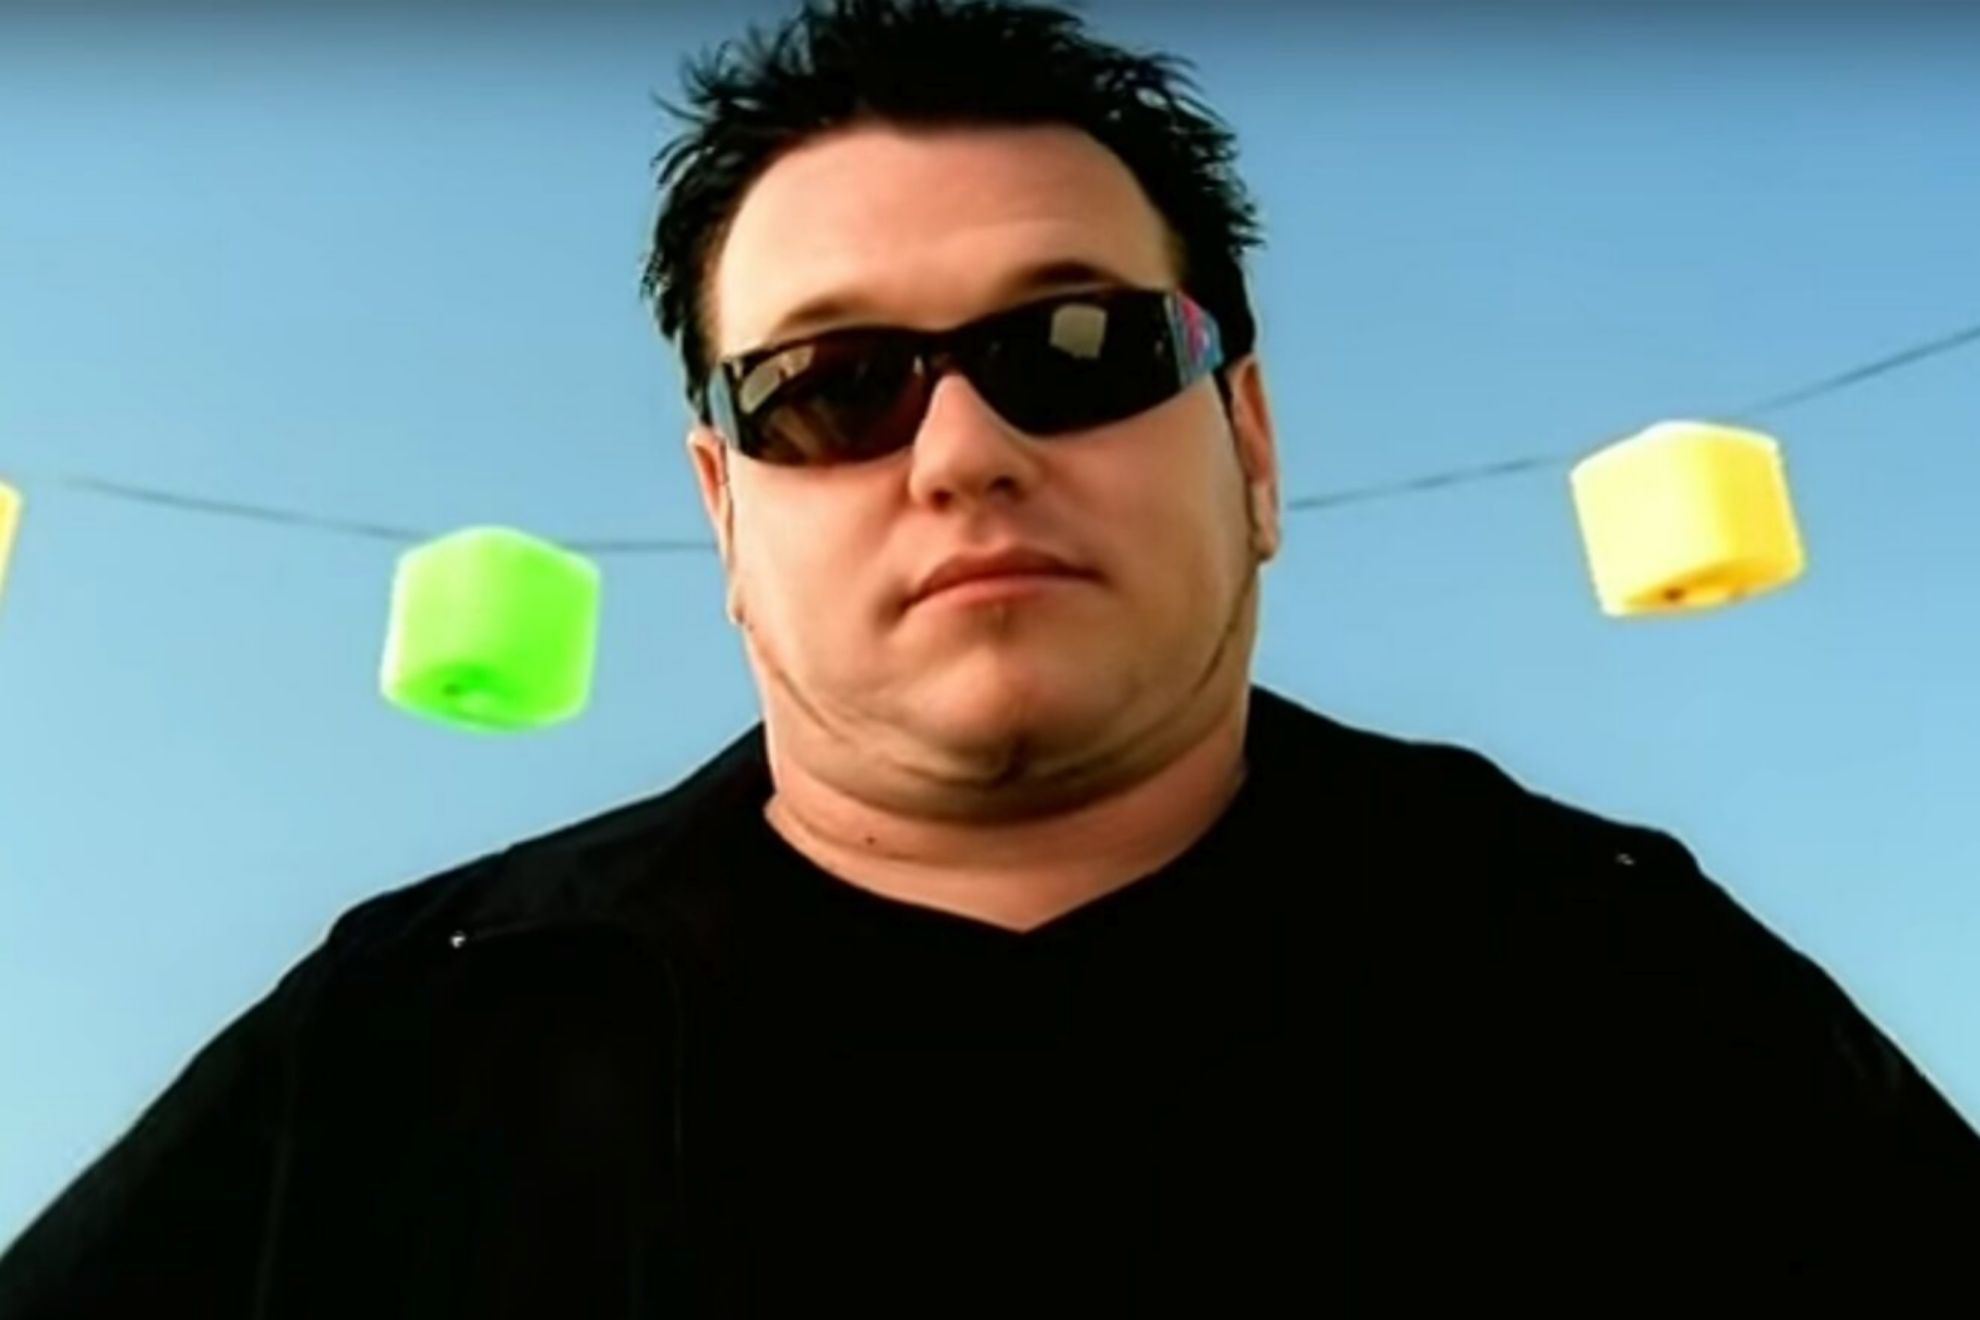 Smash Mouth singer Steve Harwell dies at 56 of acute liver failure